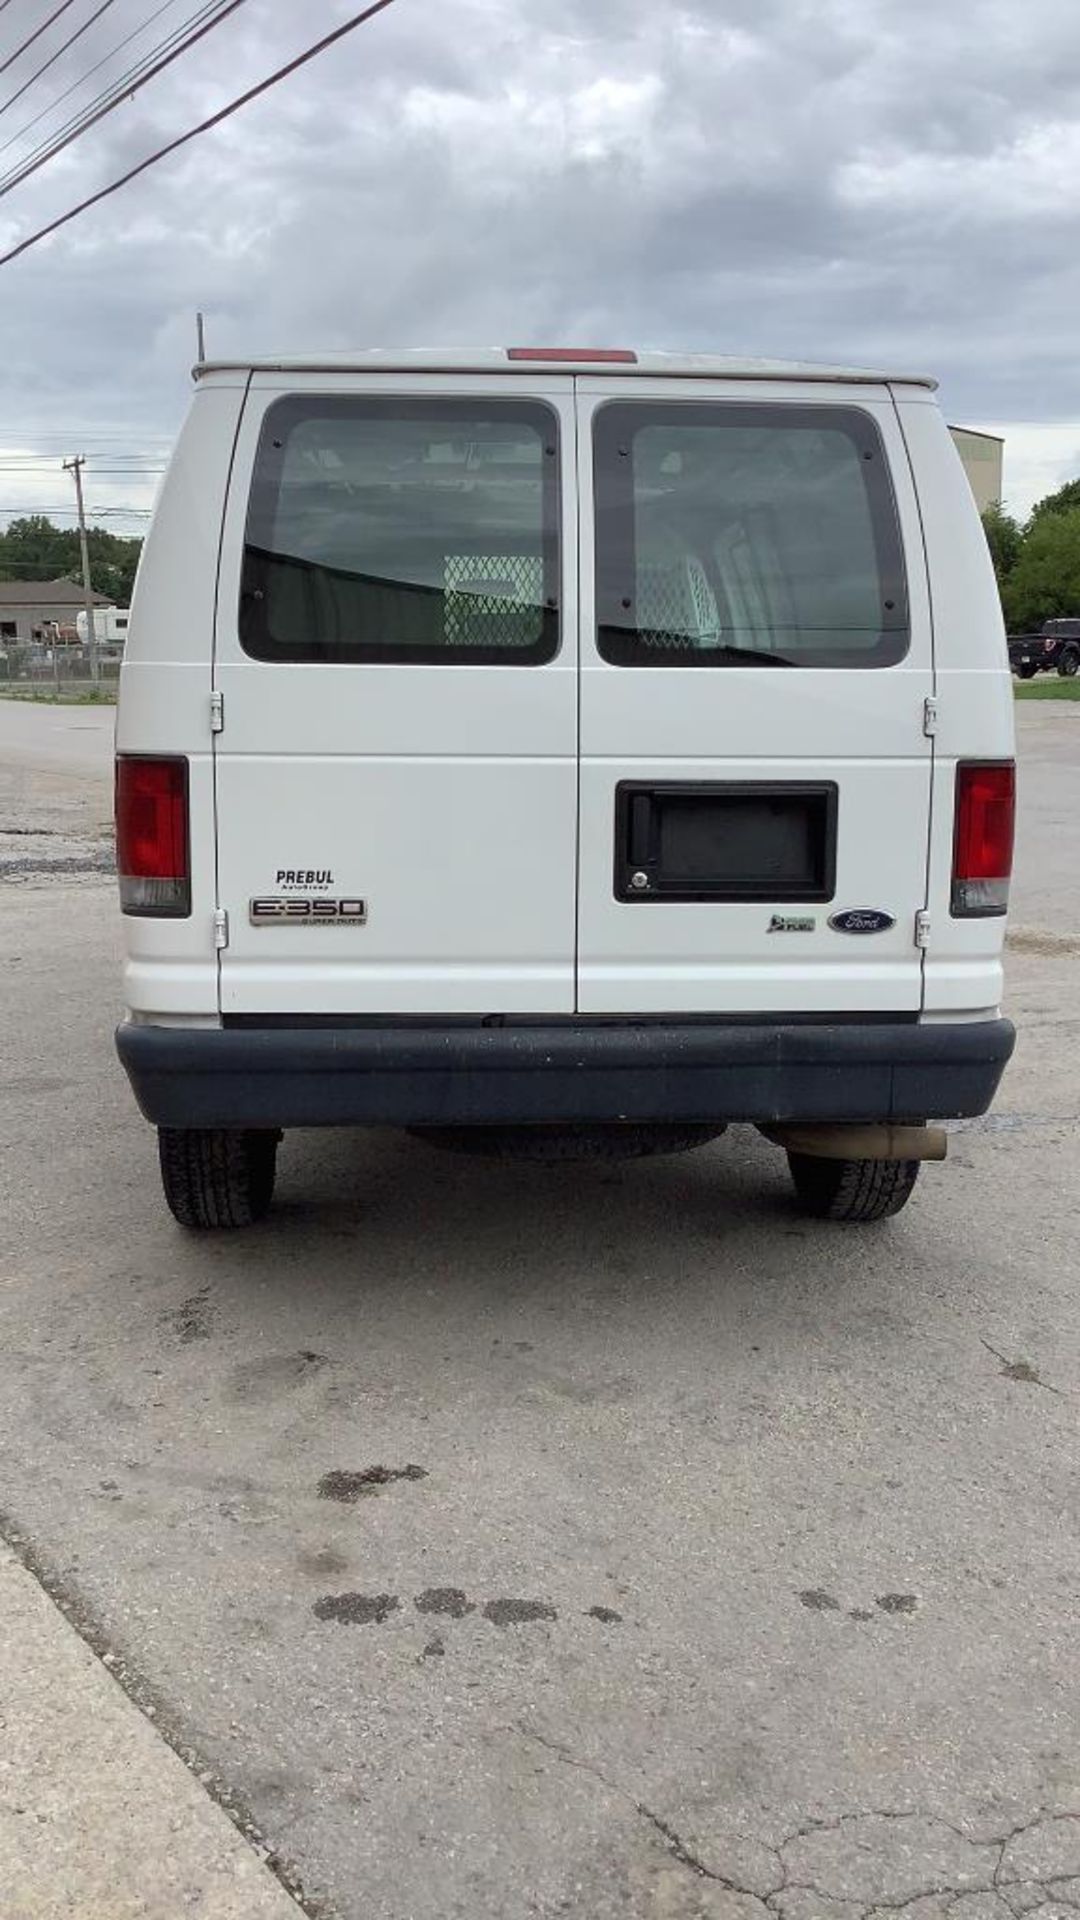 2009 Ford E-350 Cargo Van 2WD Super Duty - Image 19 of 74